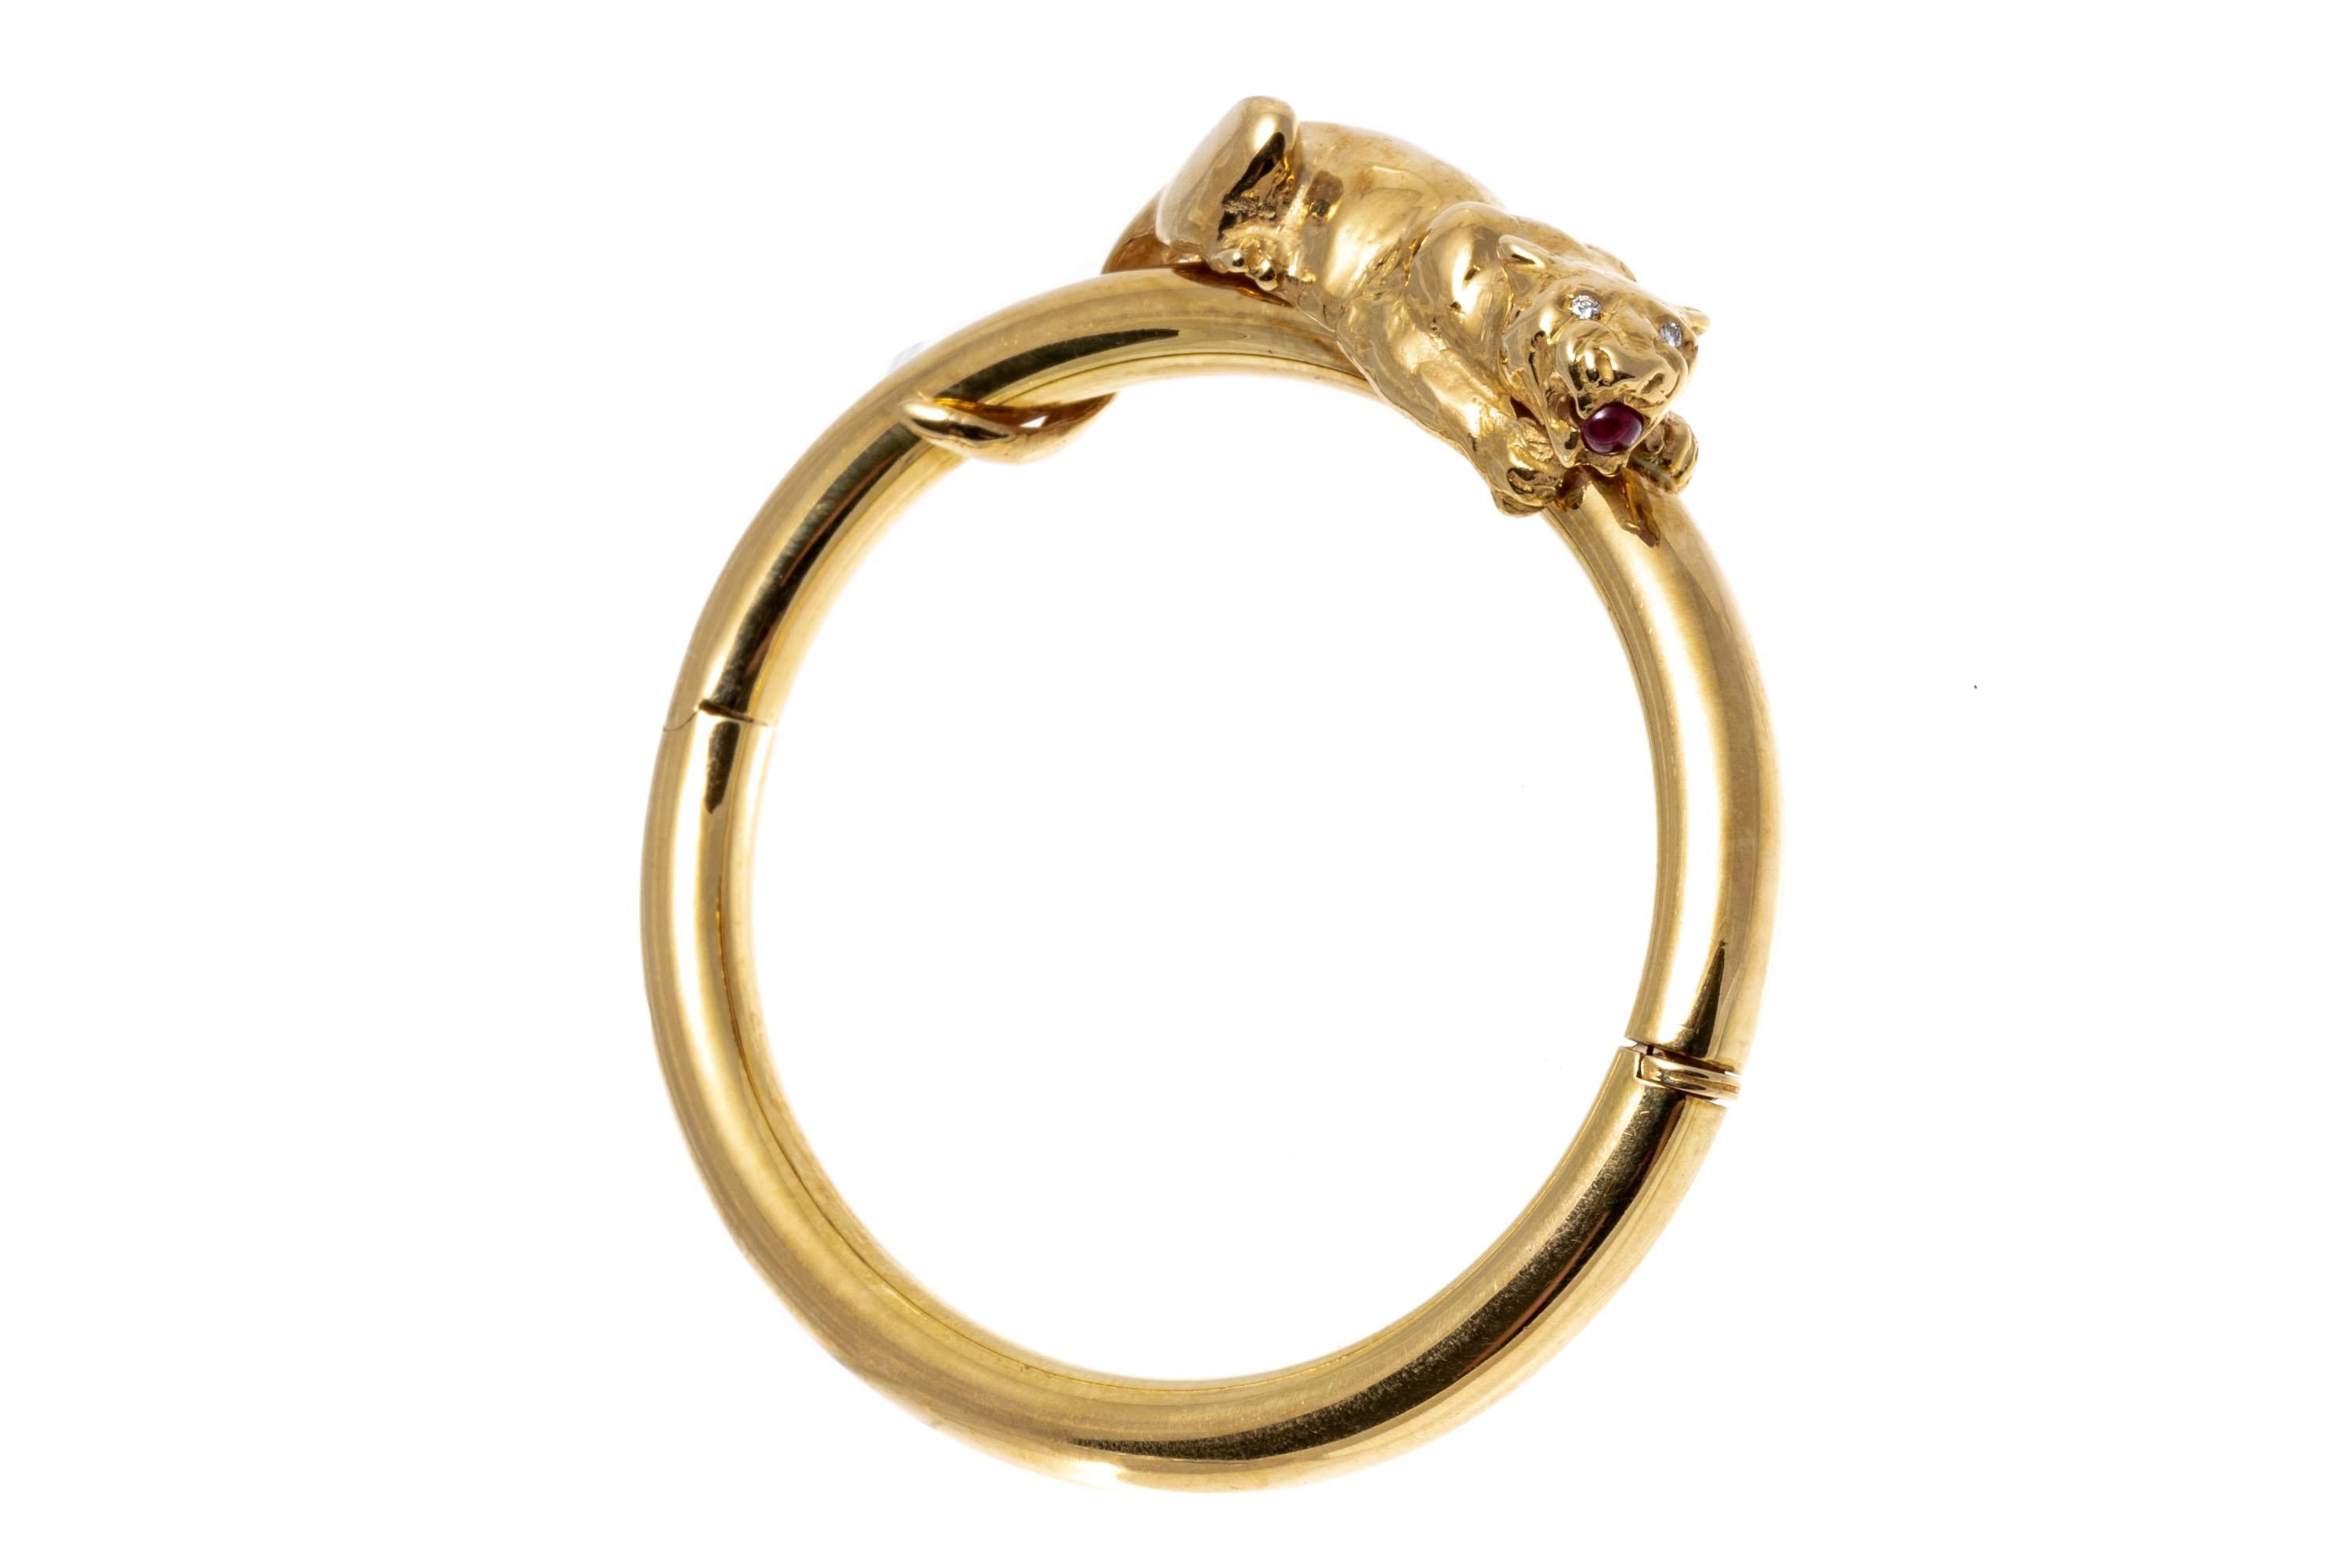 18k Yellow Gold Figural Crouching Panther Hinged Bangle Bracelet For Sale 4